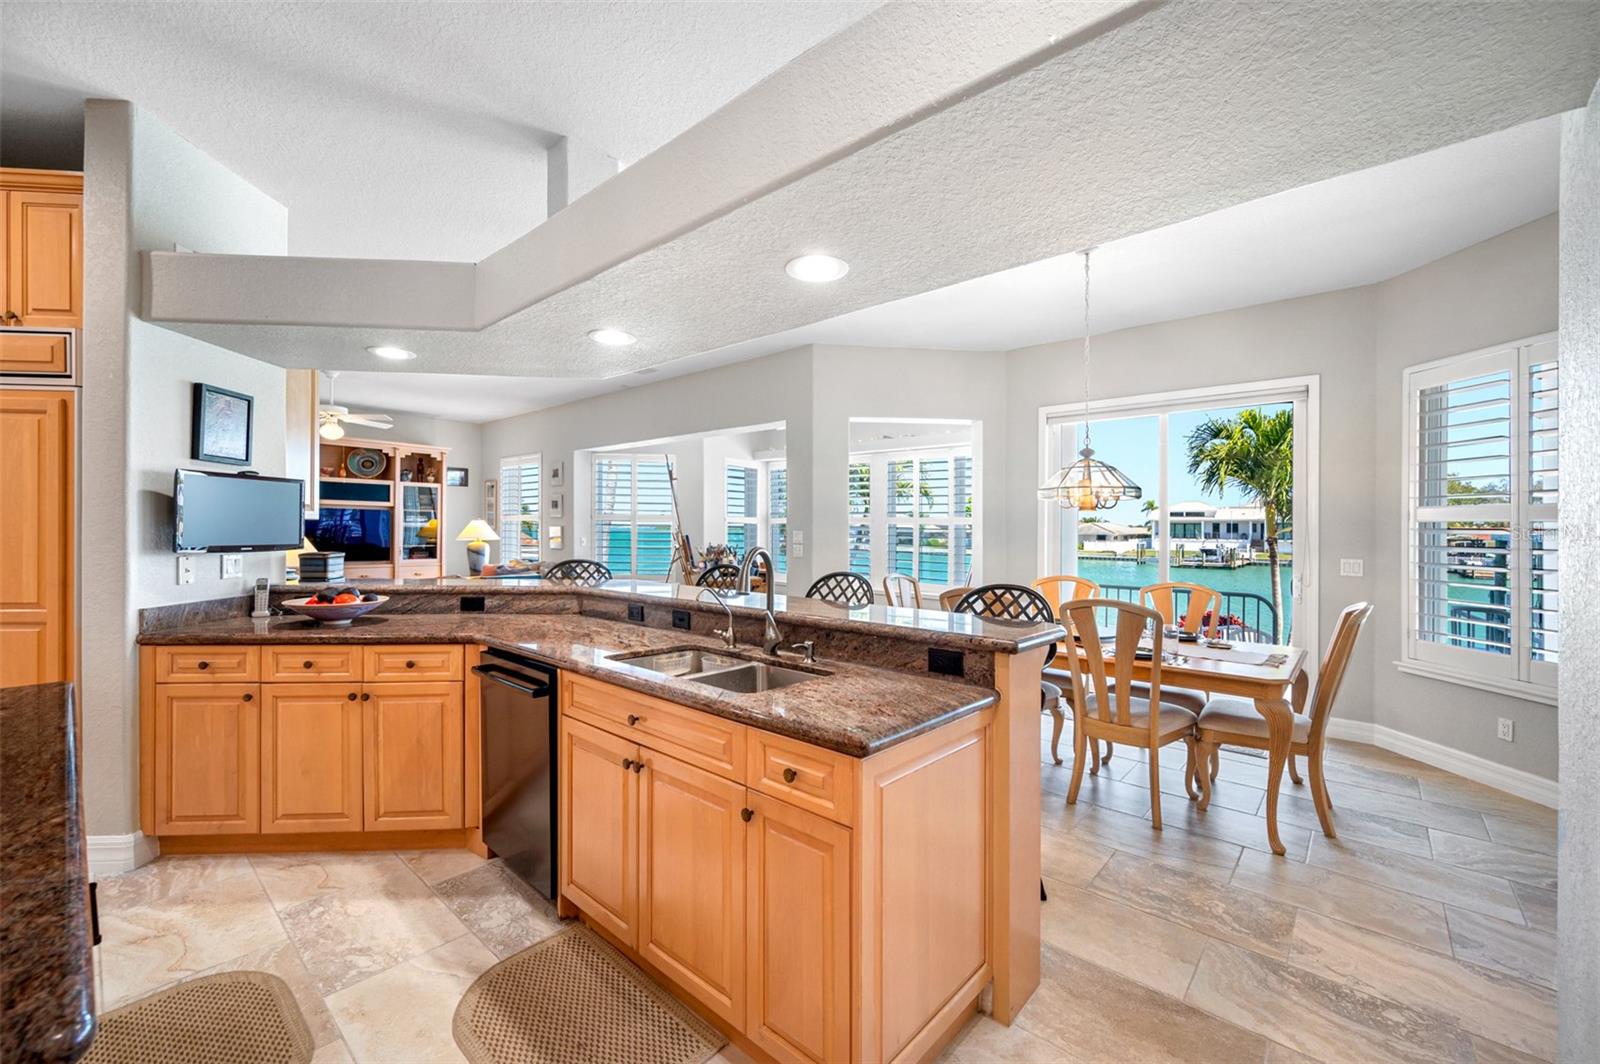 Kitchen is open to the large breakfast room and family room, all of which have water views.